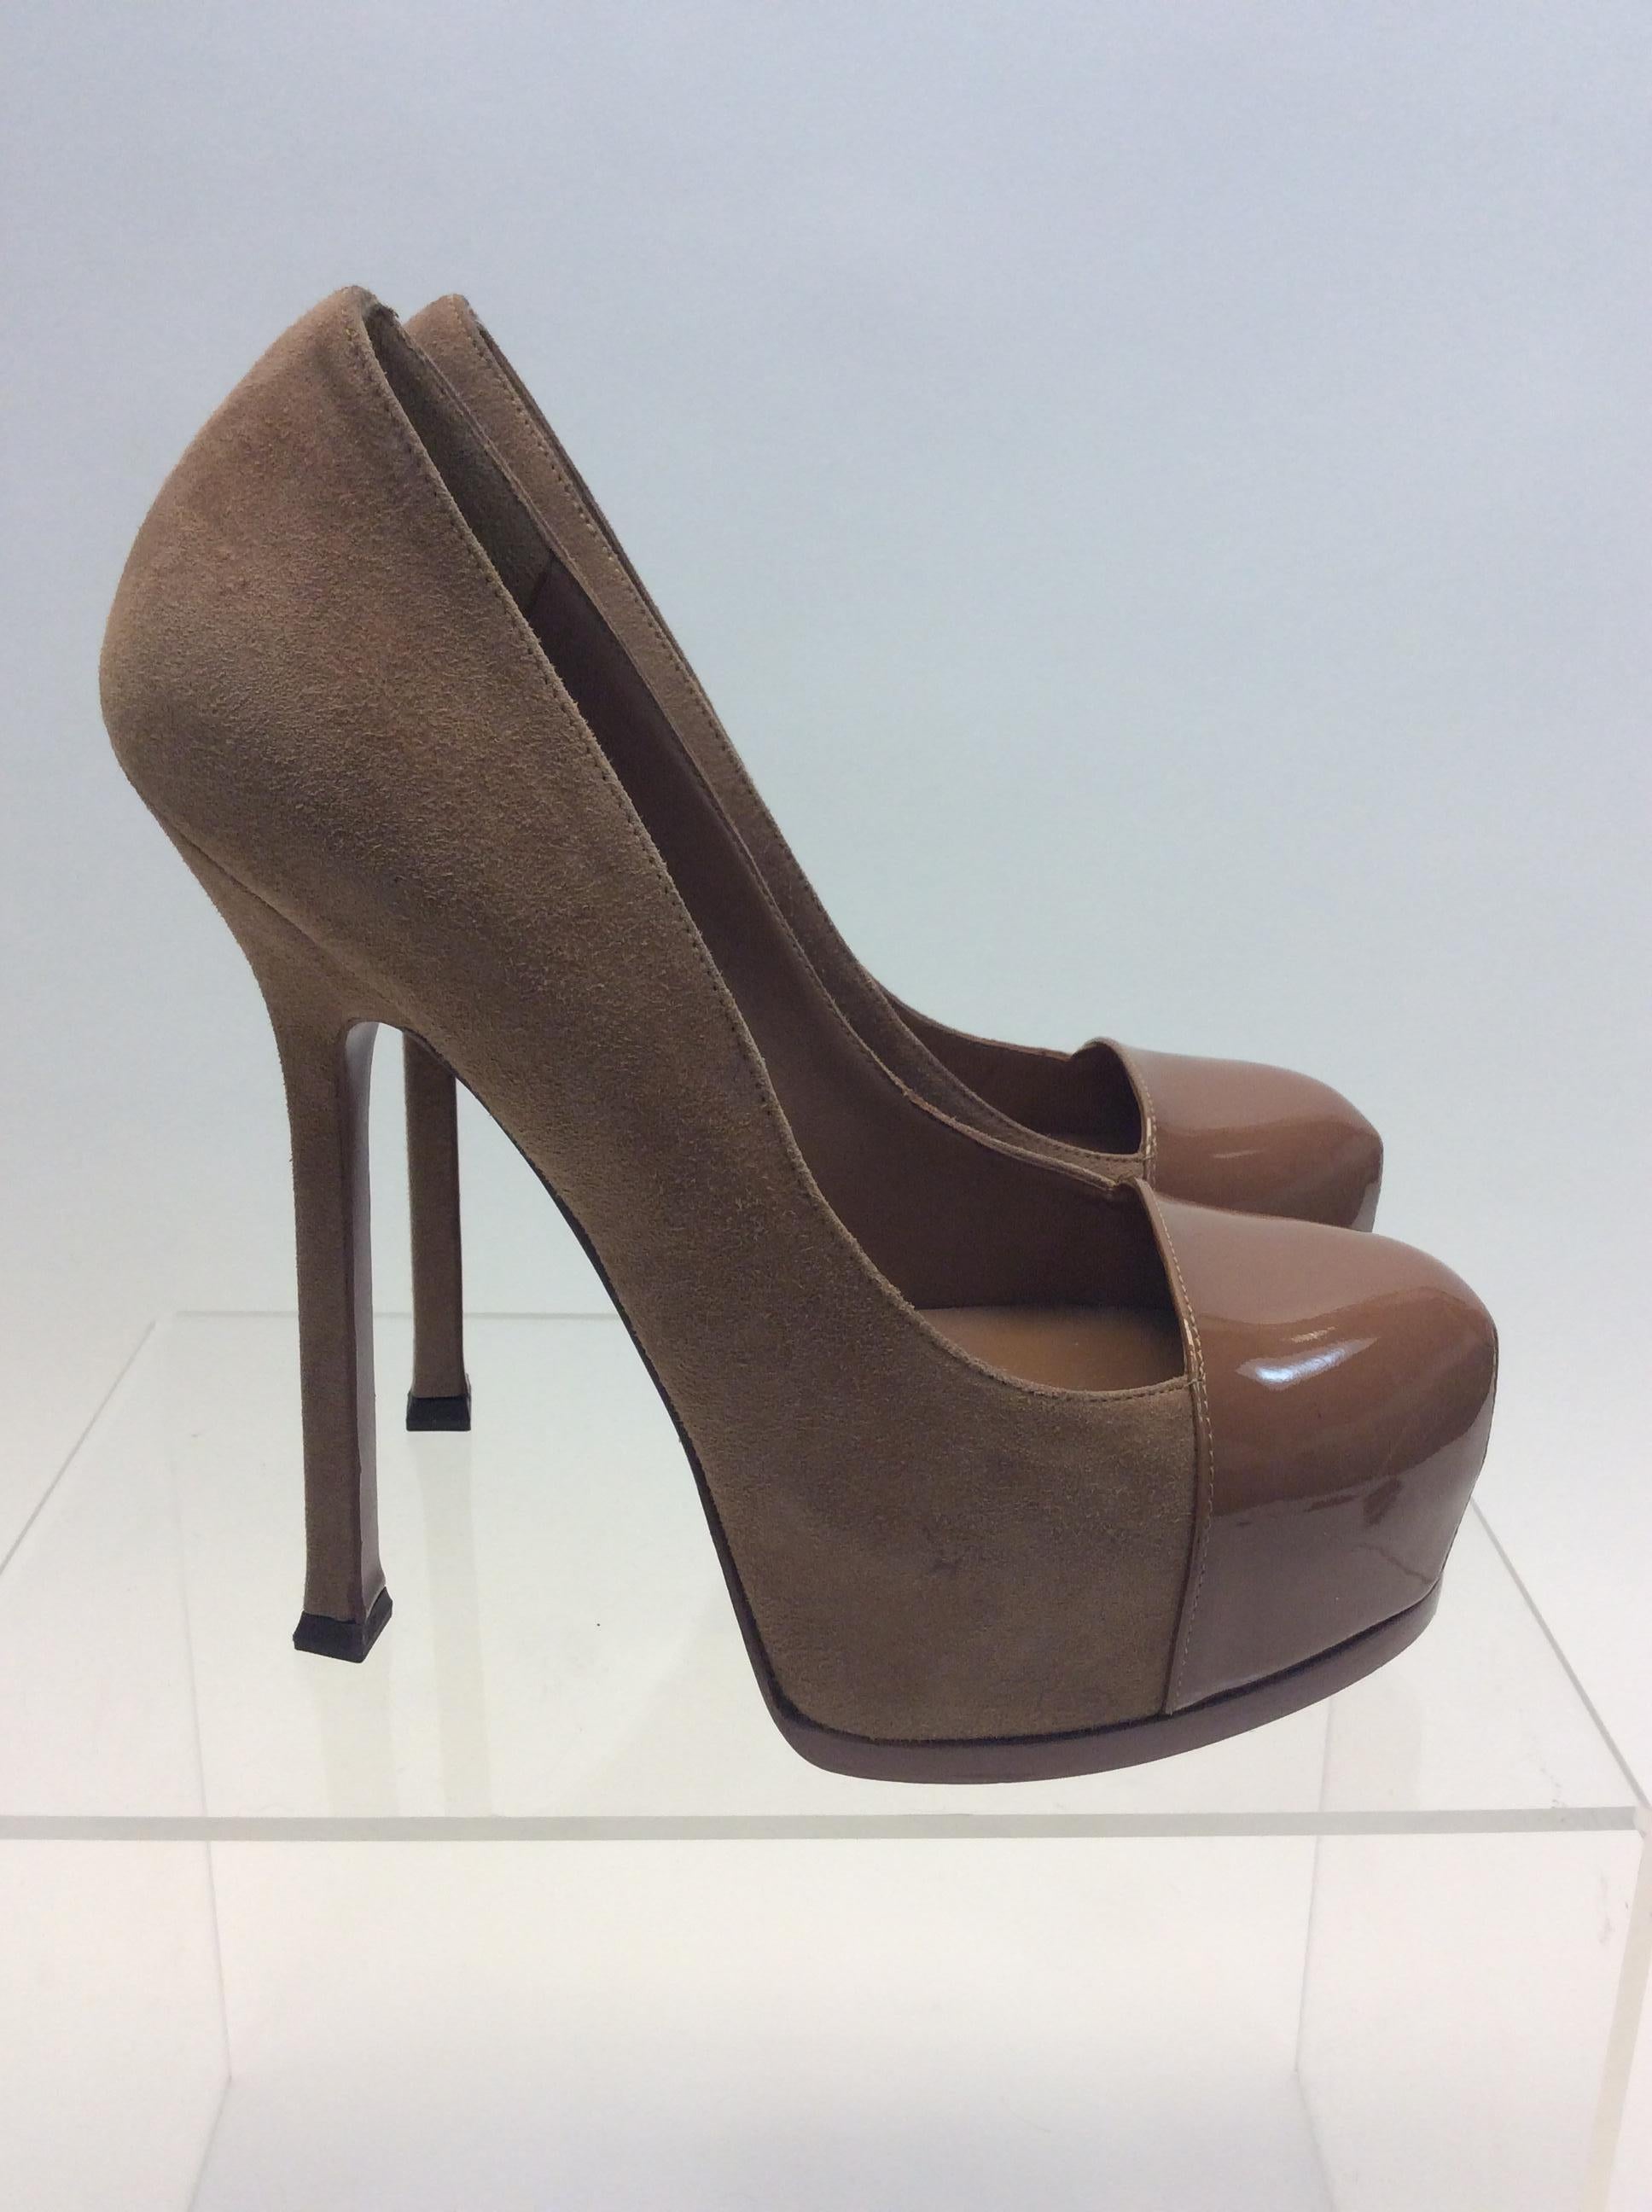 Yves Saint Laurent Nude Suede and Patent Leather Heels  Damen im Angebot